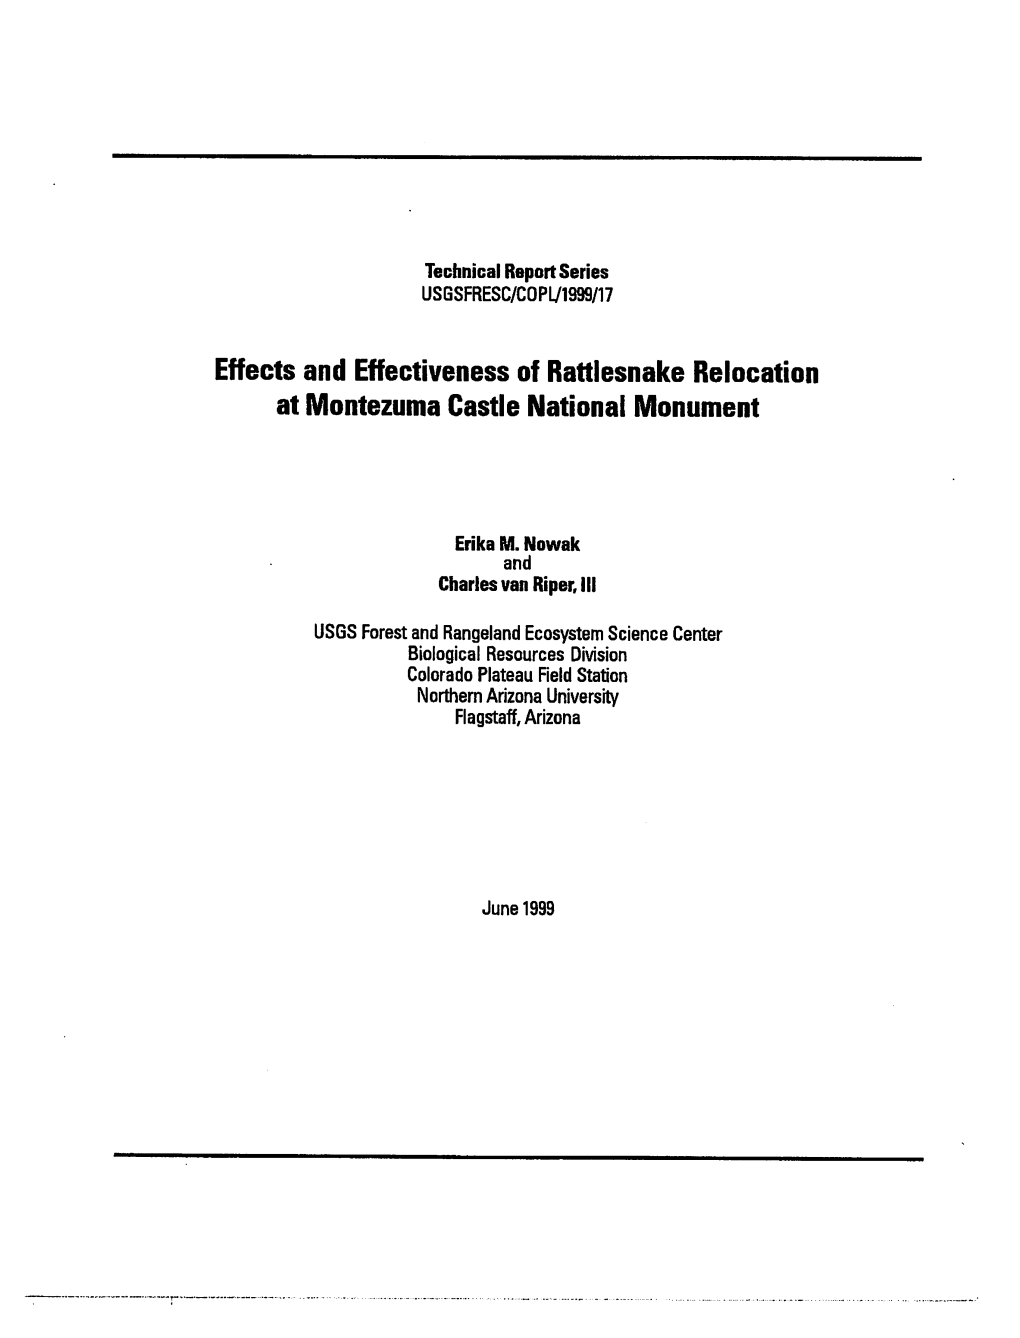 Effects and Effectiveness of Rattlesnake Relocation at Montezuma Castle National Monument